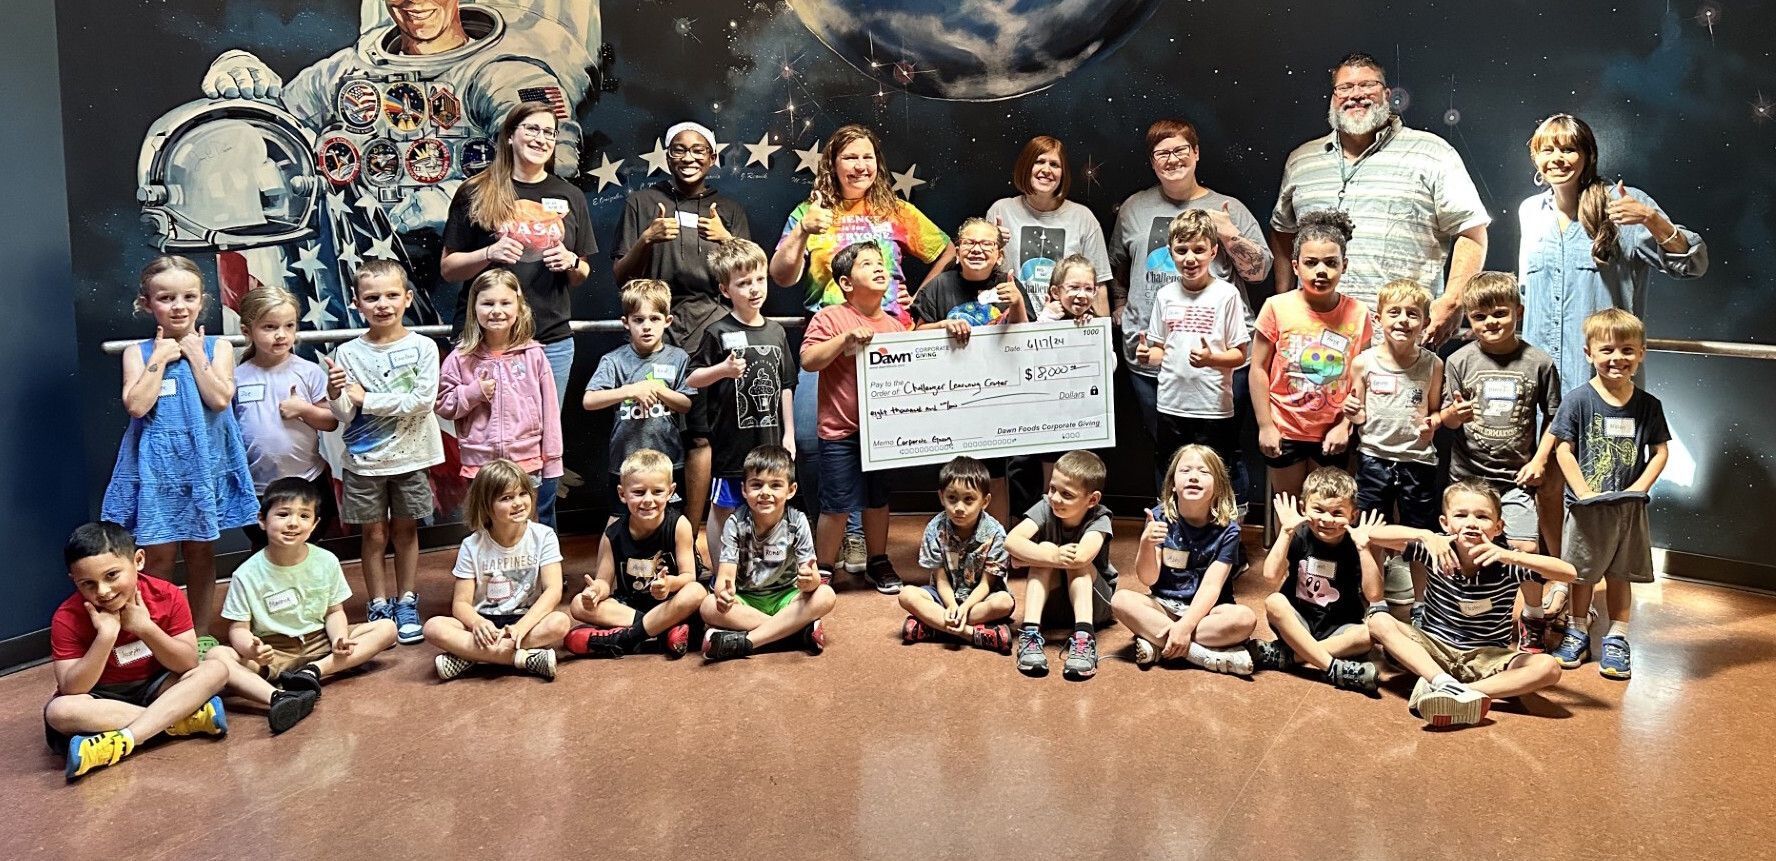 Dawn Foods donates to Challenger Learning Center of Northwest Indiana